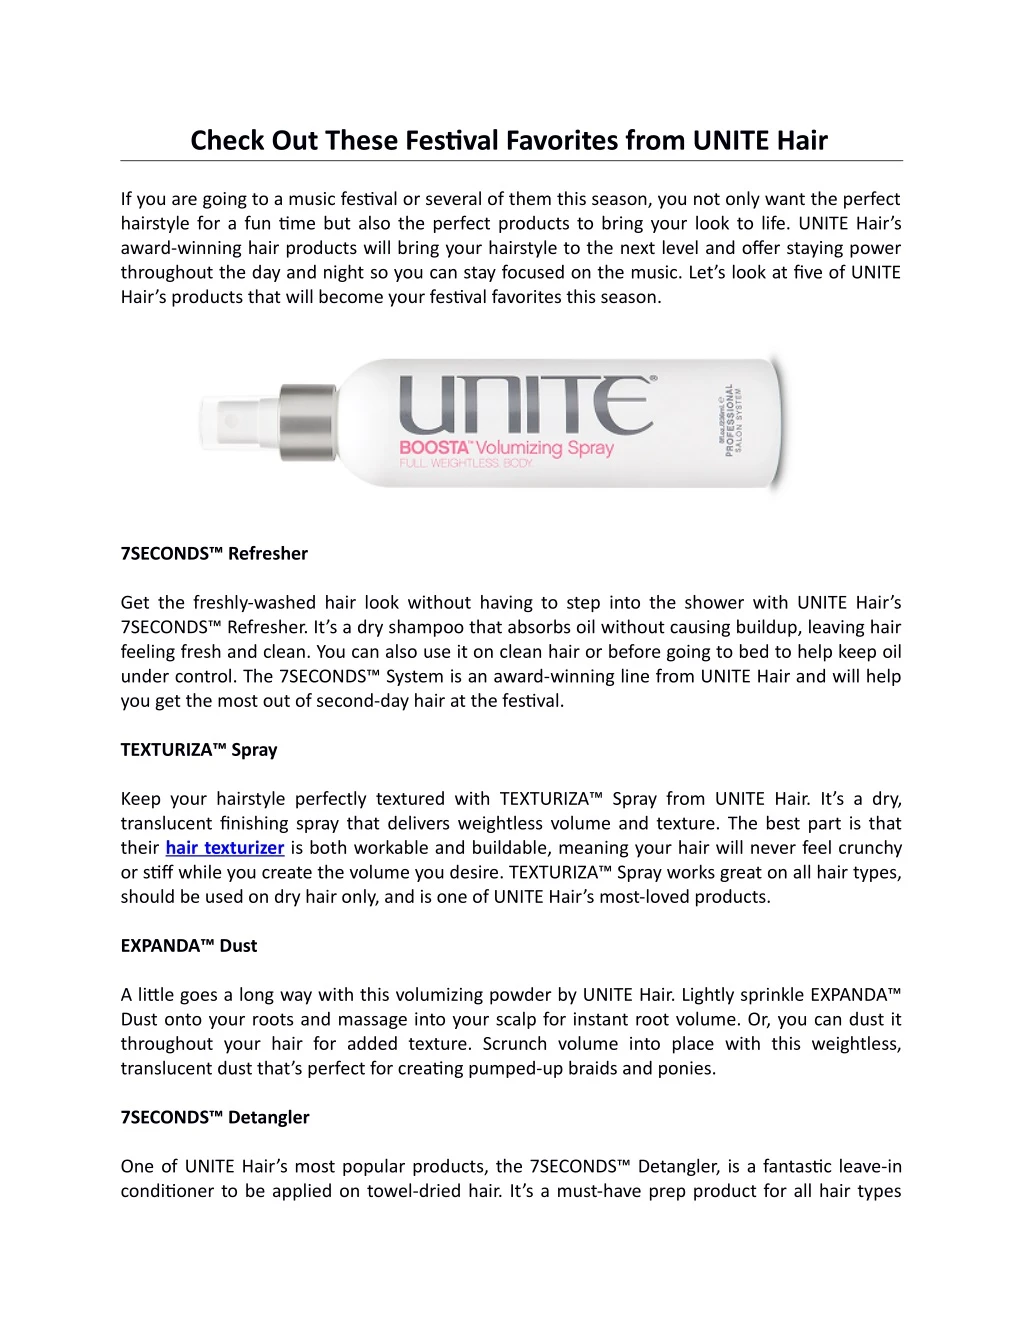 check out these festival favorites from unite hair